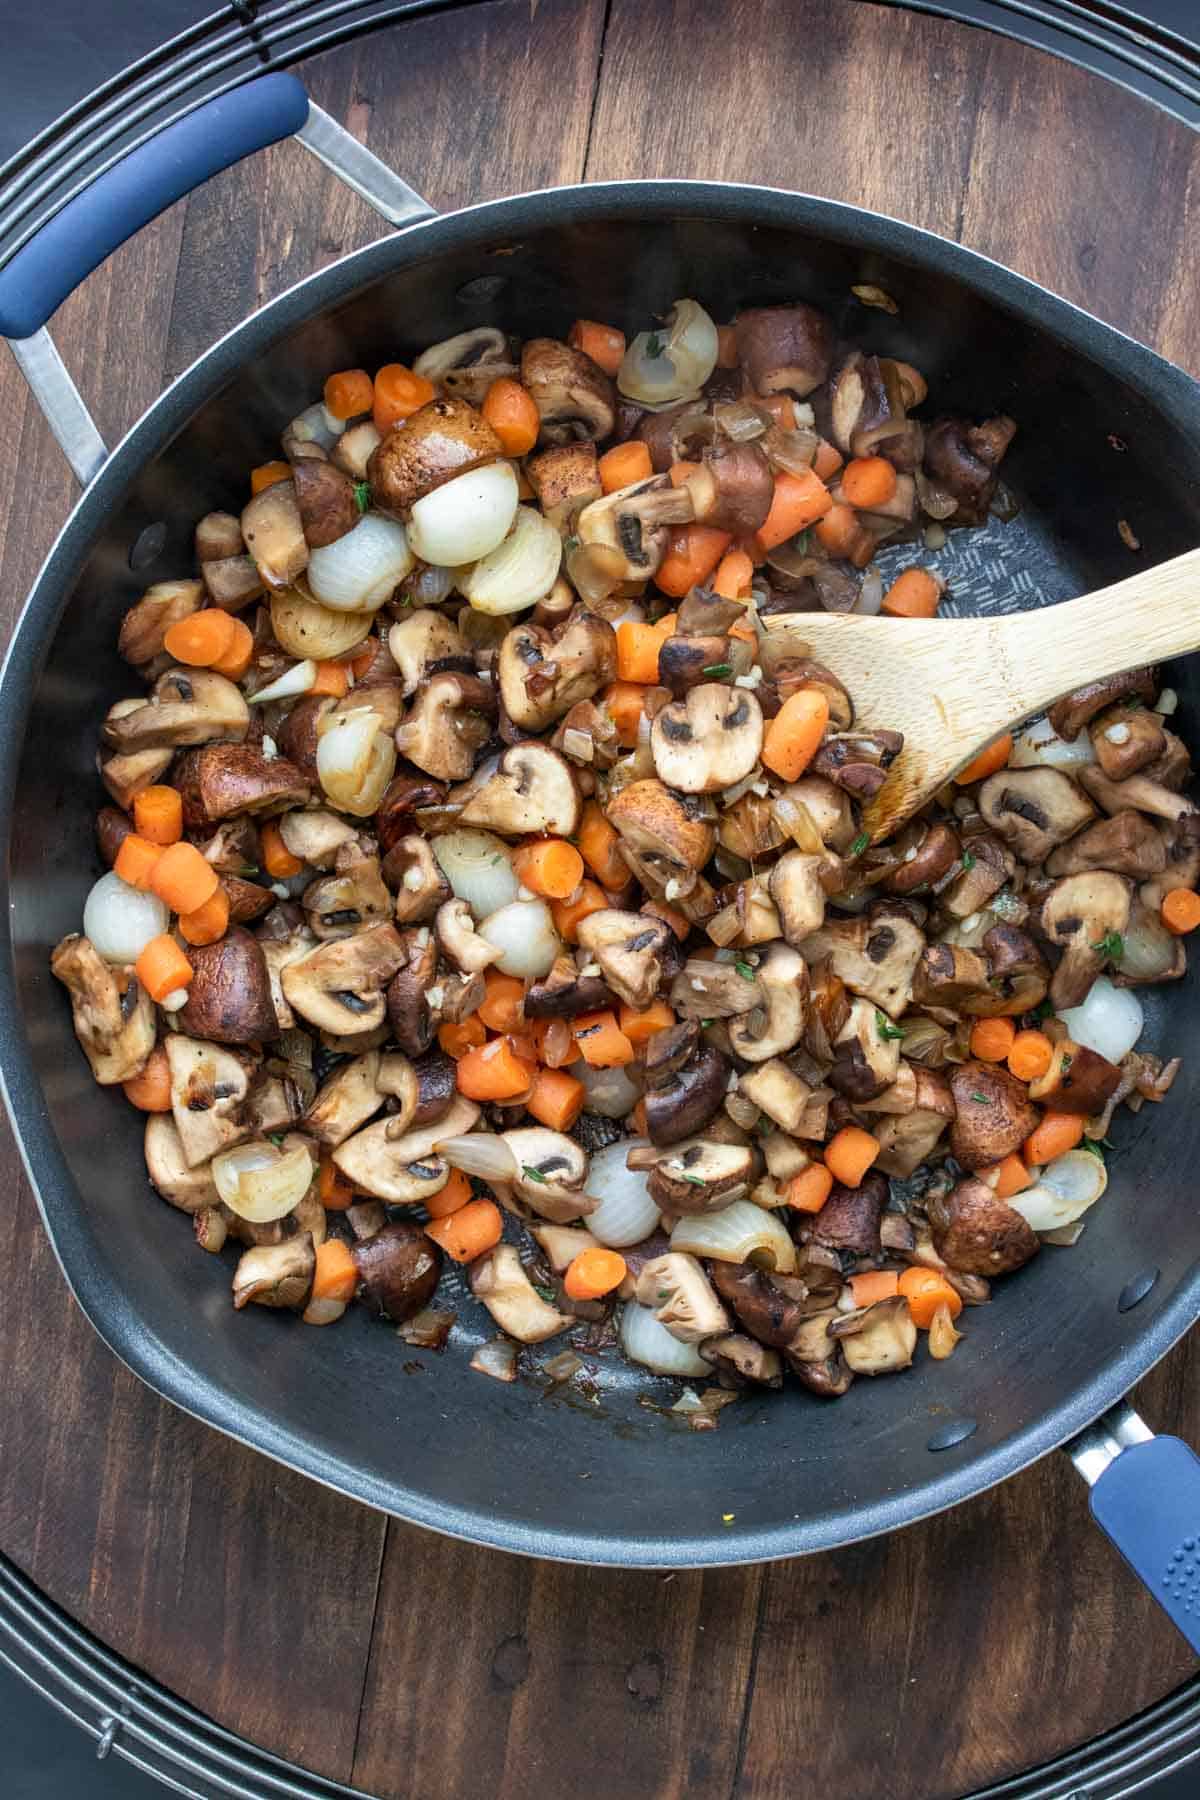 Carrots, mushrooms and onions being mixed in a pan by a wooden spoon